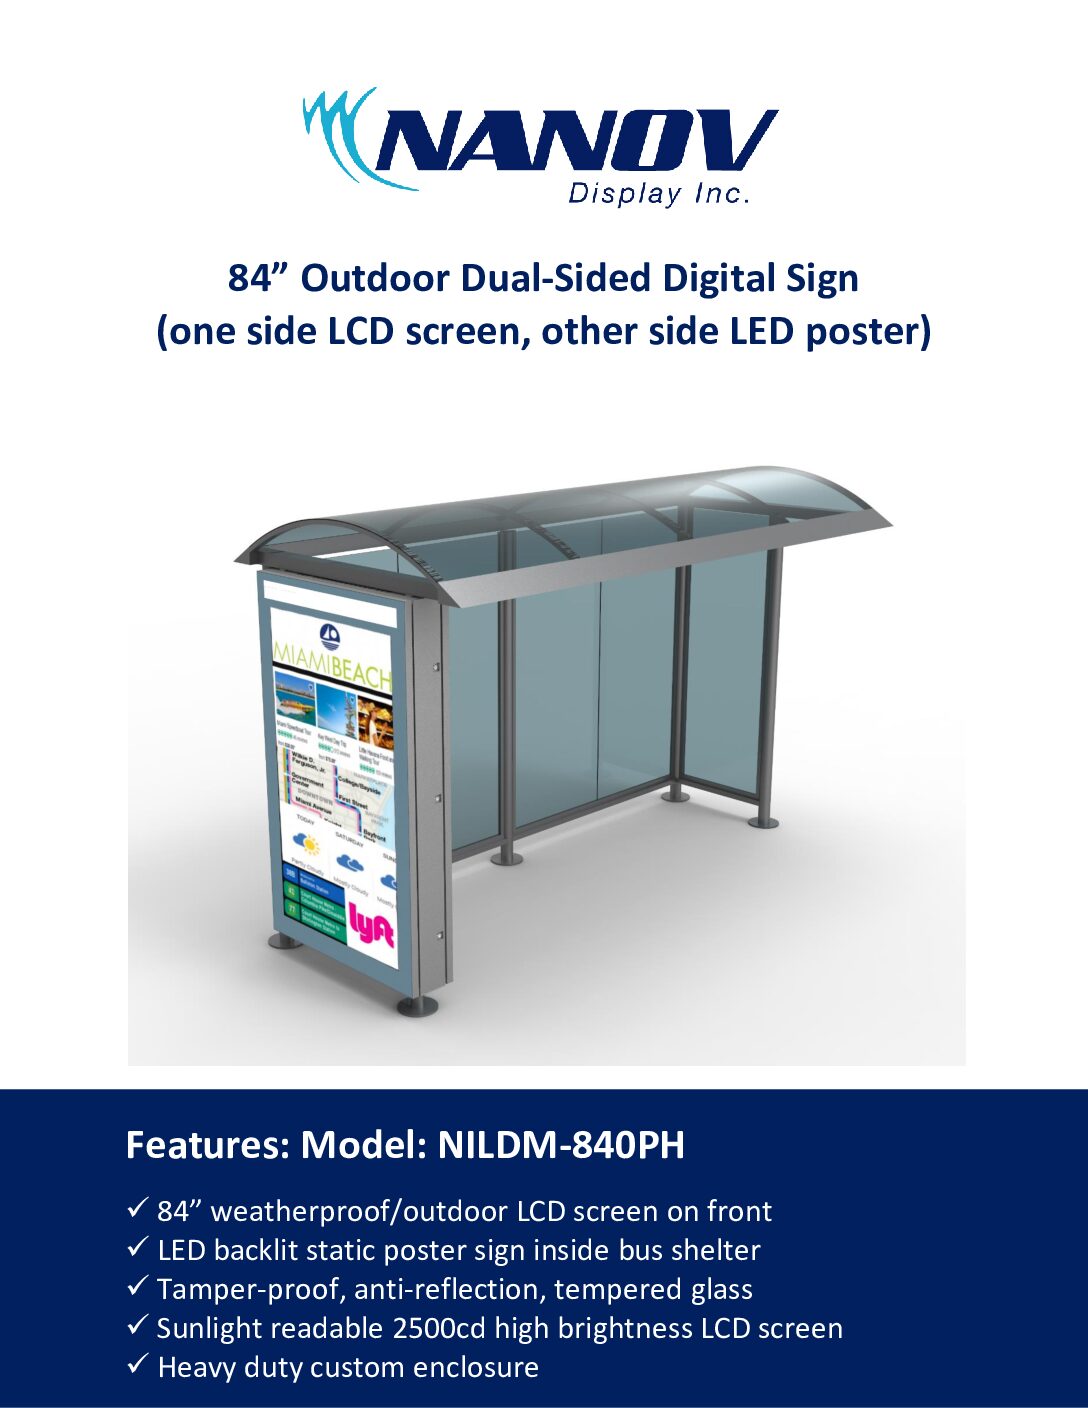 84” Outdoor Dual-Sided Digital Sign